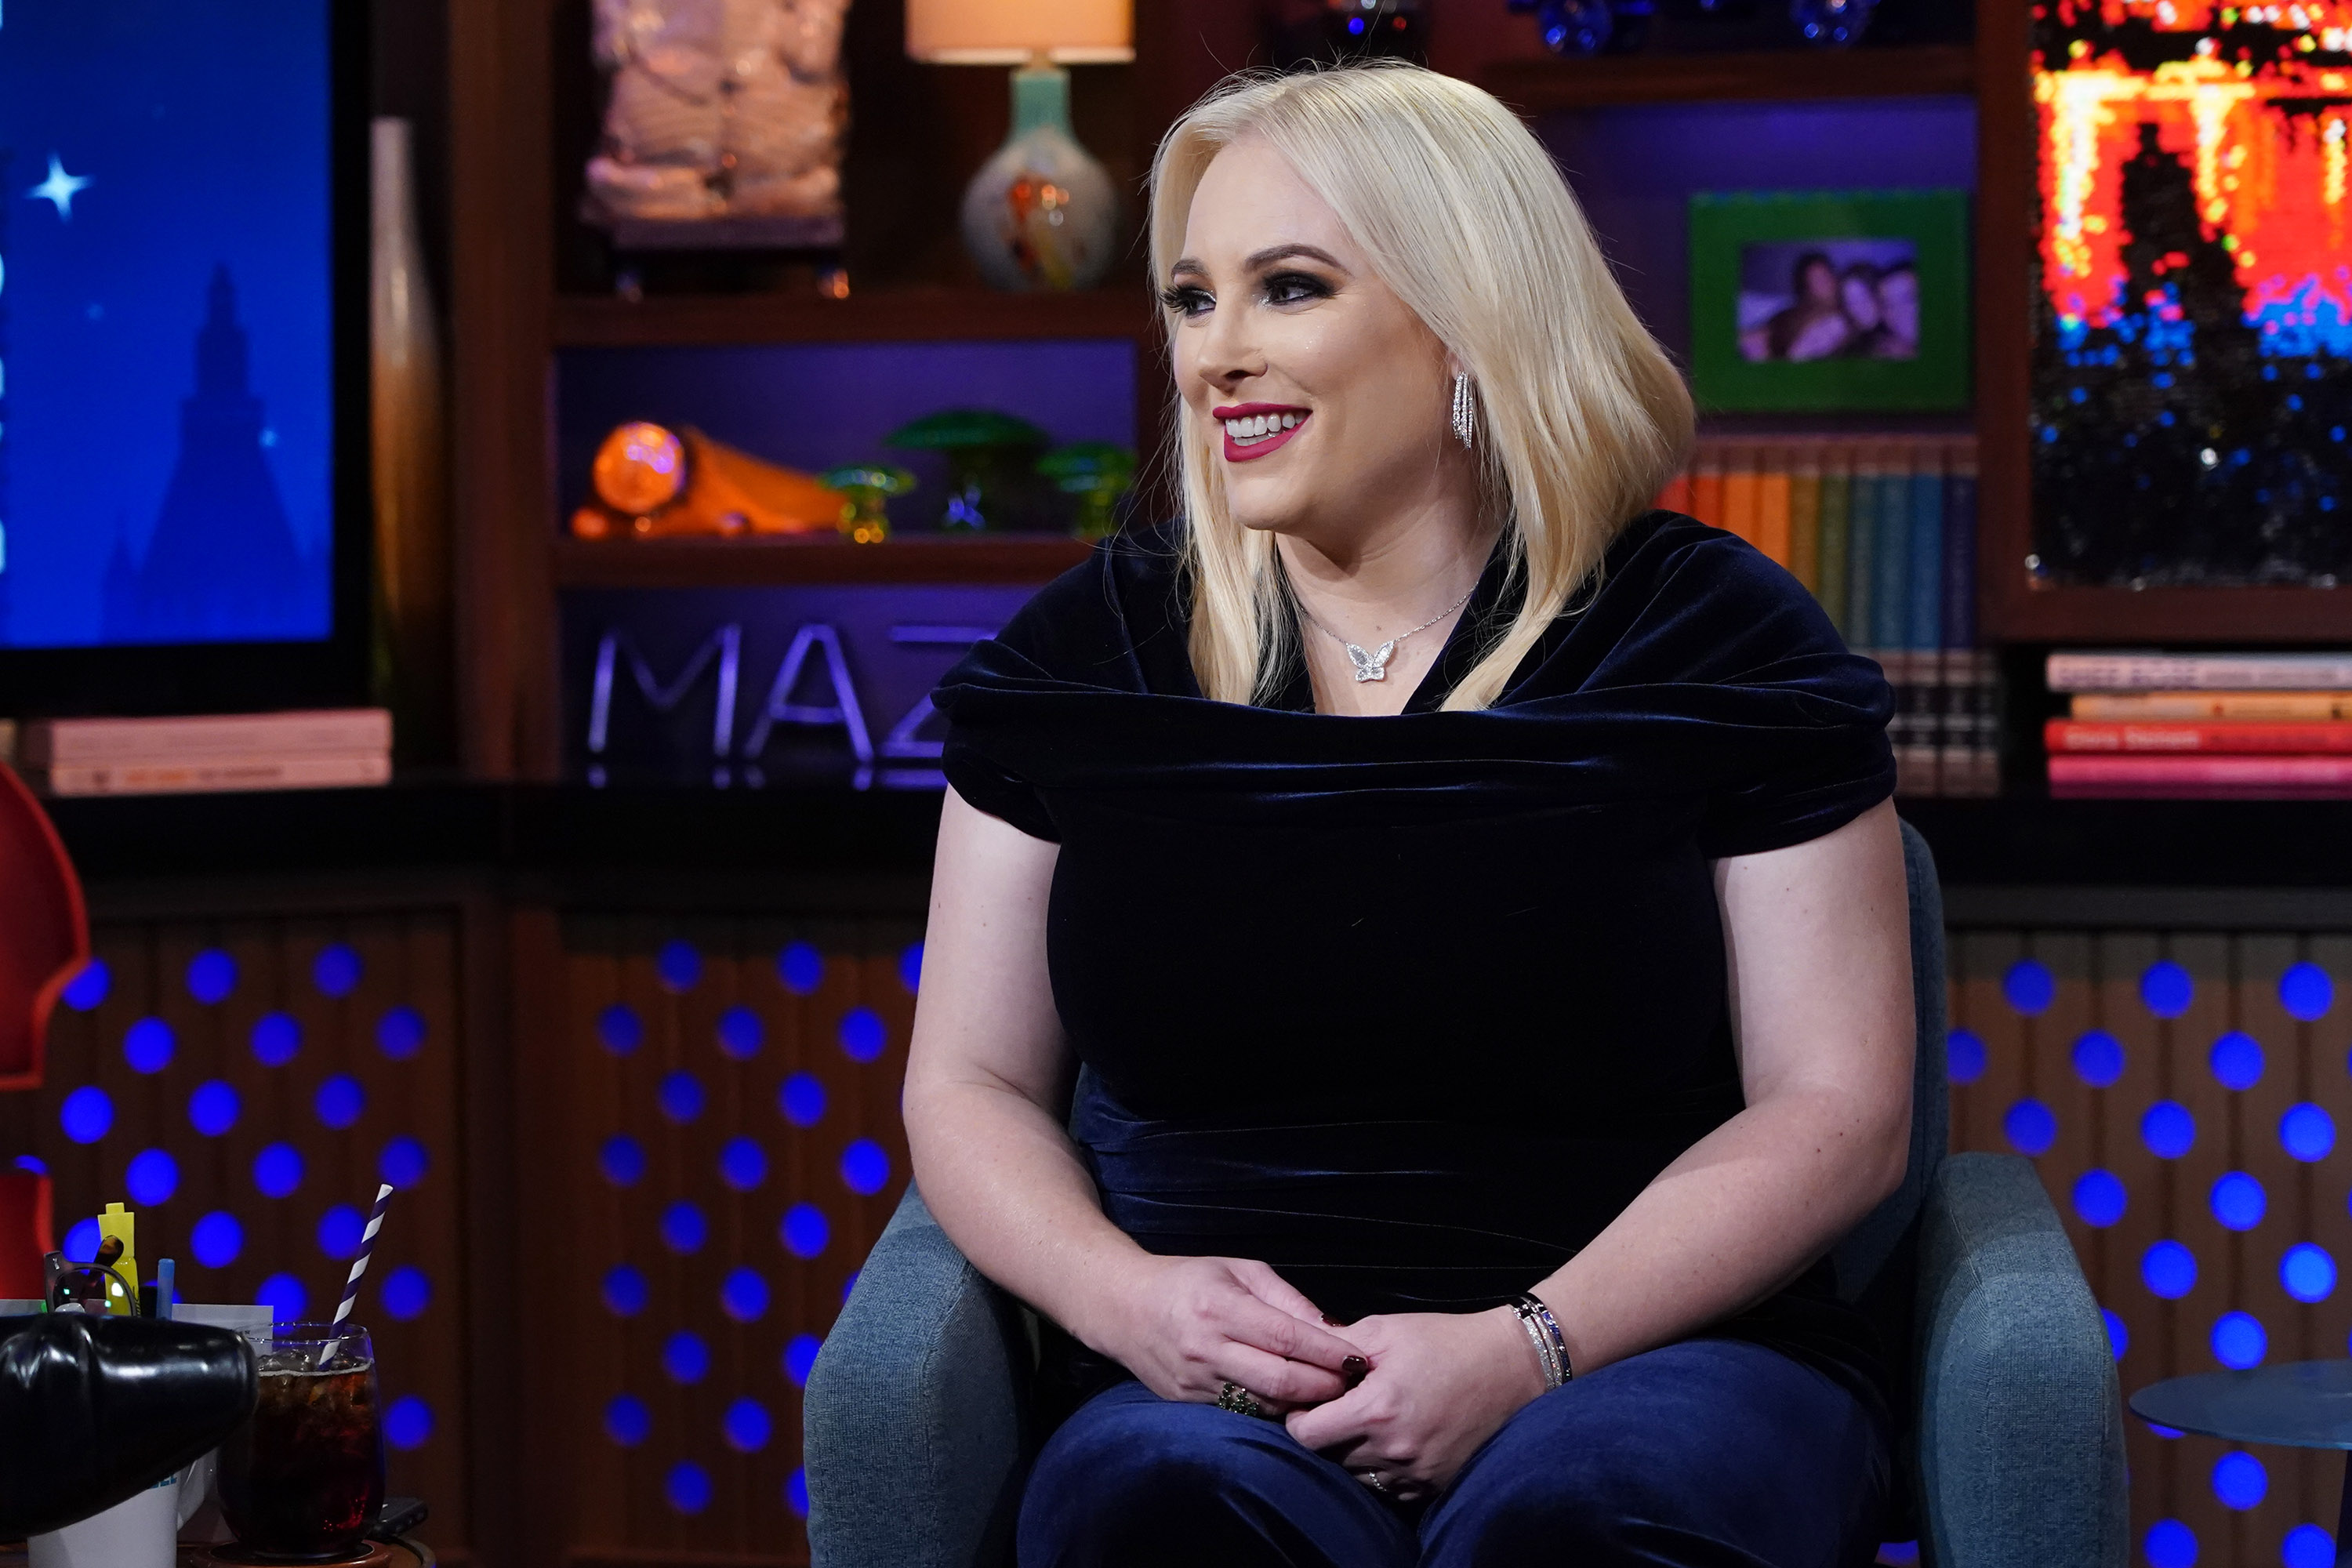 Meghan McCain smiles while wearing a black short-sleeved shirt and jeans